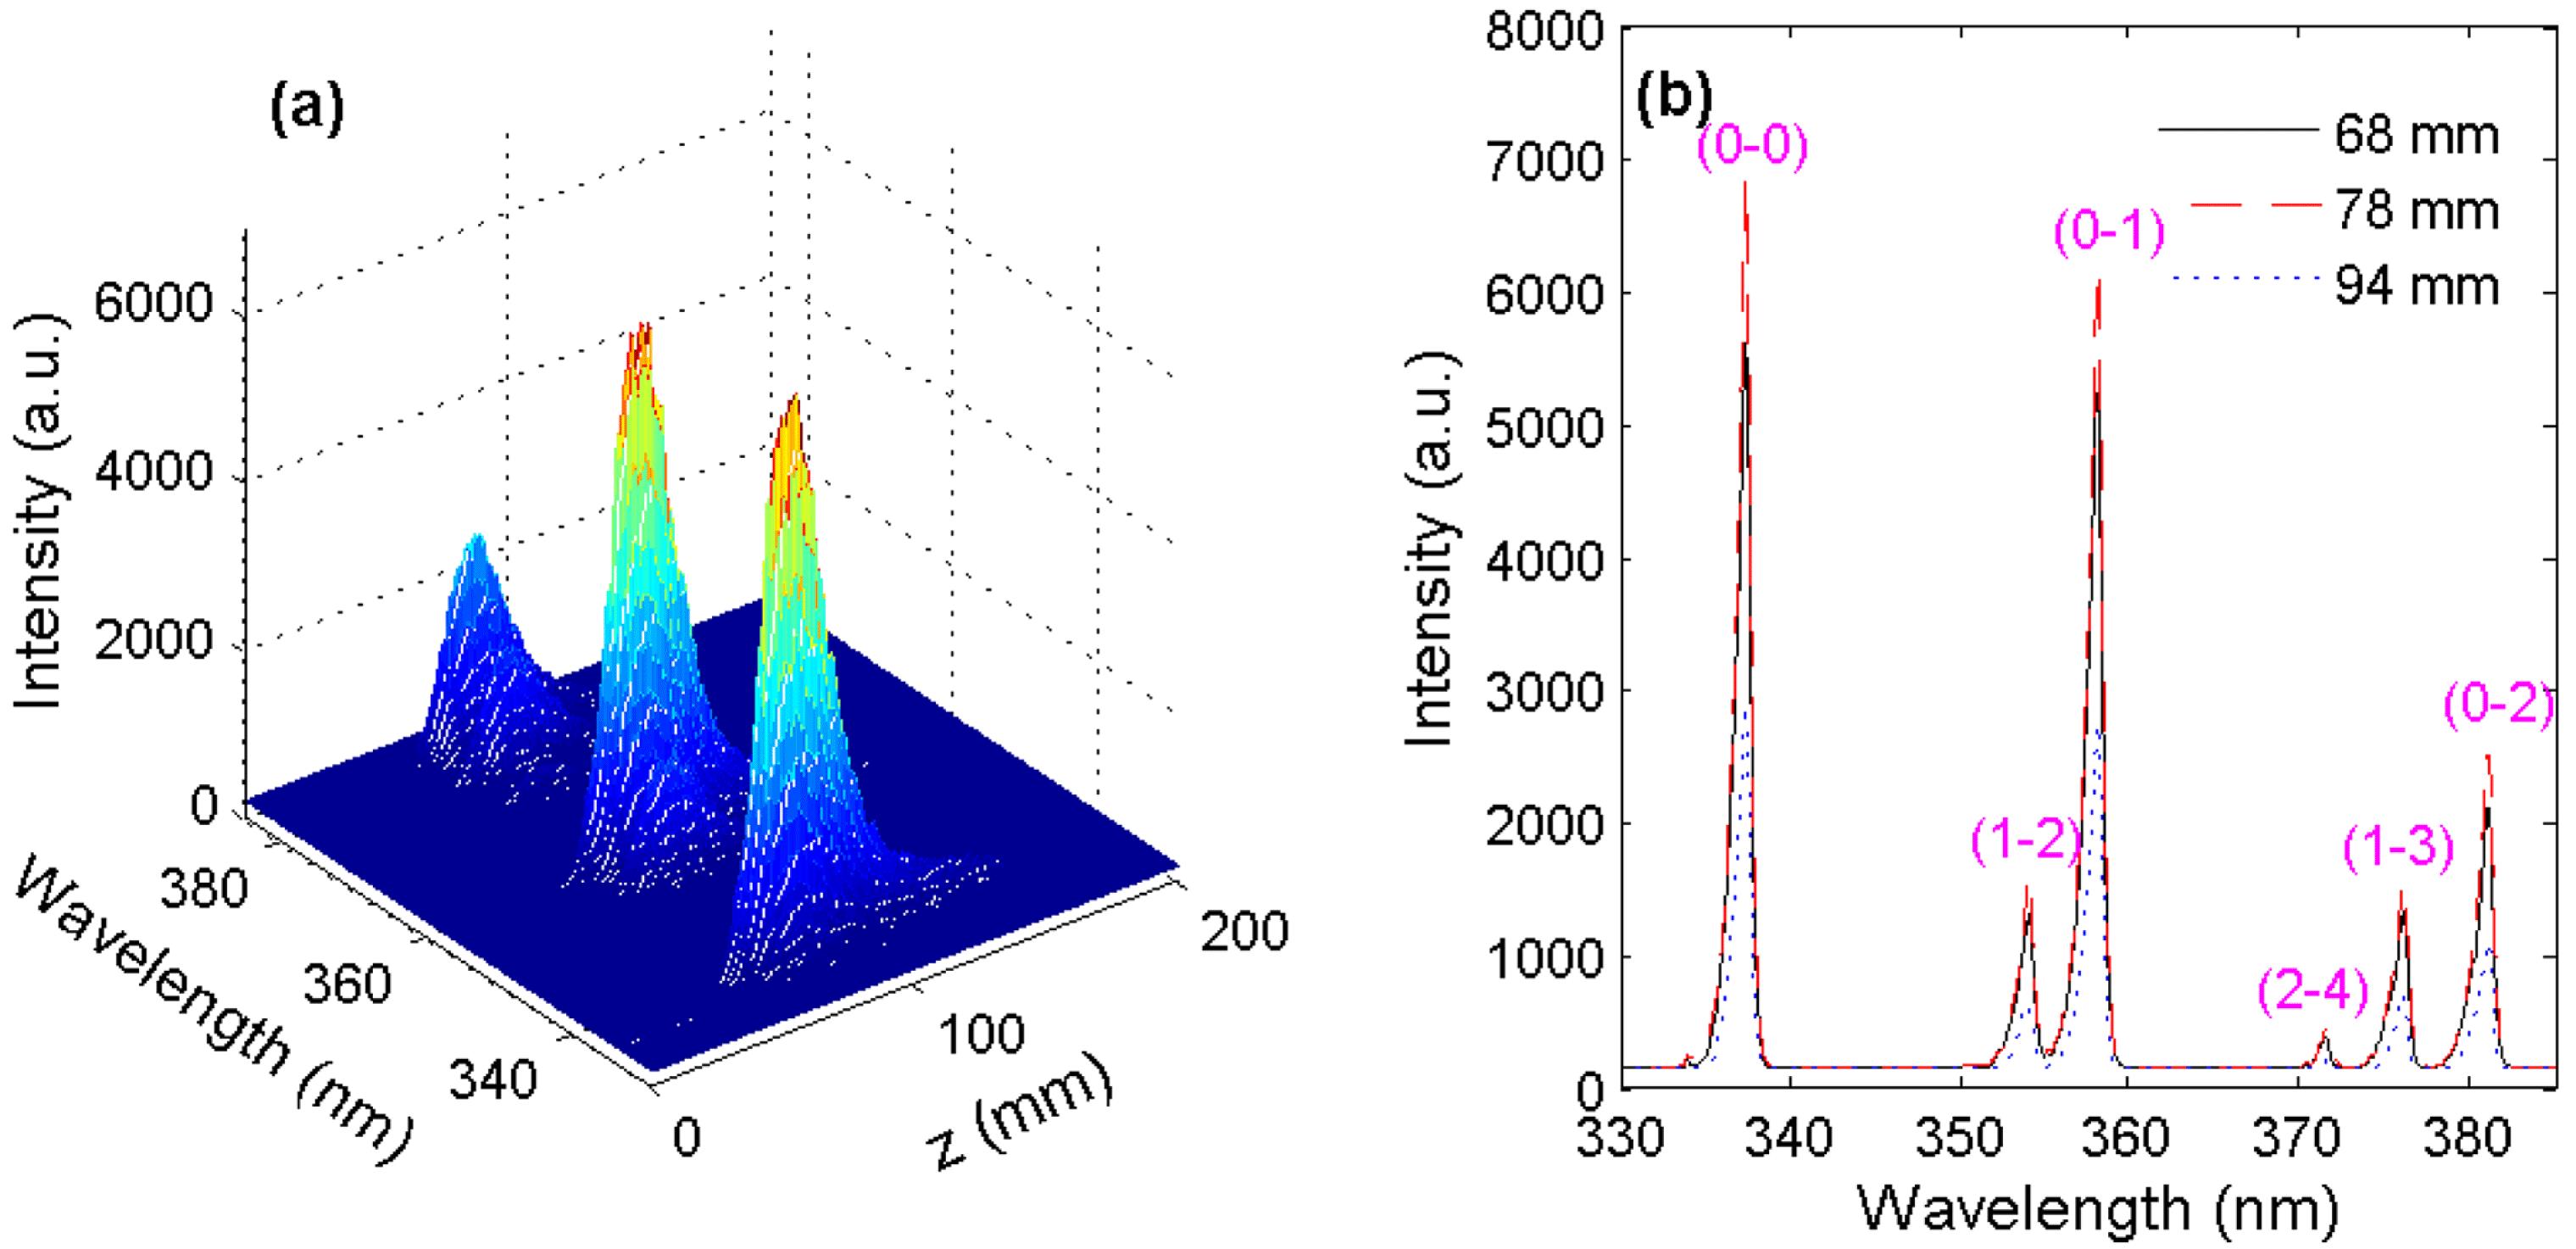 (a) Change of fluorescence spectra with the propagation distance $z$. (b) Fluorescence spectra measured as $z$ is 68 mm (solid black line), 78 mm (dash-dotted red line), and 94 mm (dotted blue line). The focal length is 100 cm and laser energy is 2.2 mJ. The pink words marked above the lines correspond to the signals from the second positive band system of N$_{2}$ ($C^{3}{\it\Pi}_{u}{-}B^{3}{\it\Pi}_{g}$ transition)[23–26]. In the transitions $v{-}v^{\prime }$, $v$ and $v^{\prime }$ denote the vibrational levels of upper and lower electronic states, respectively.